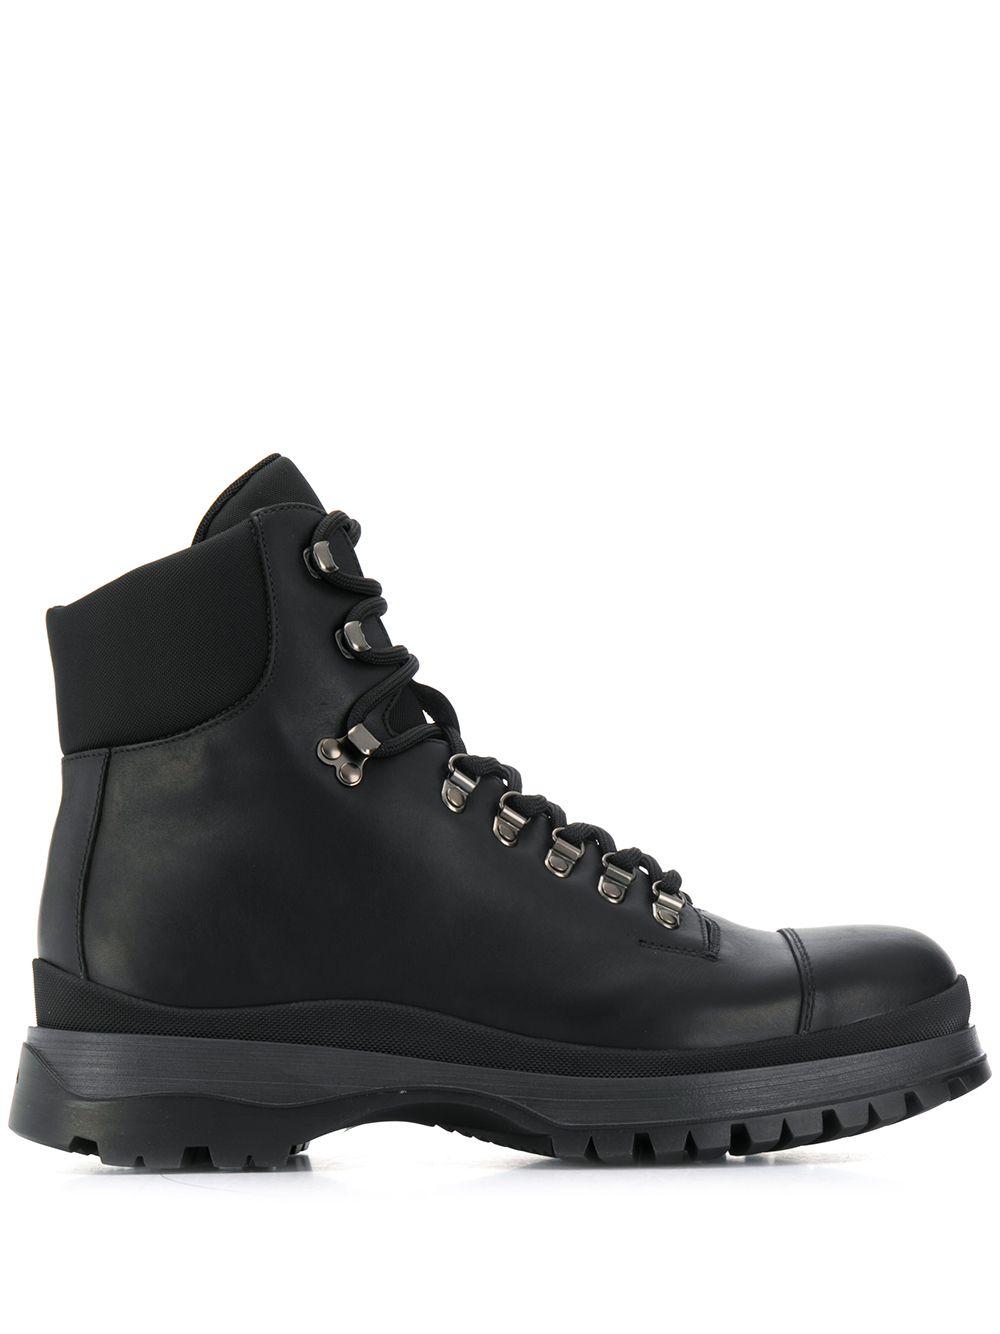 Prada Leather Brixen Hiking Boots in Black for Men - Lyst